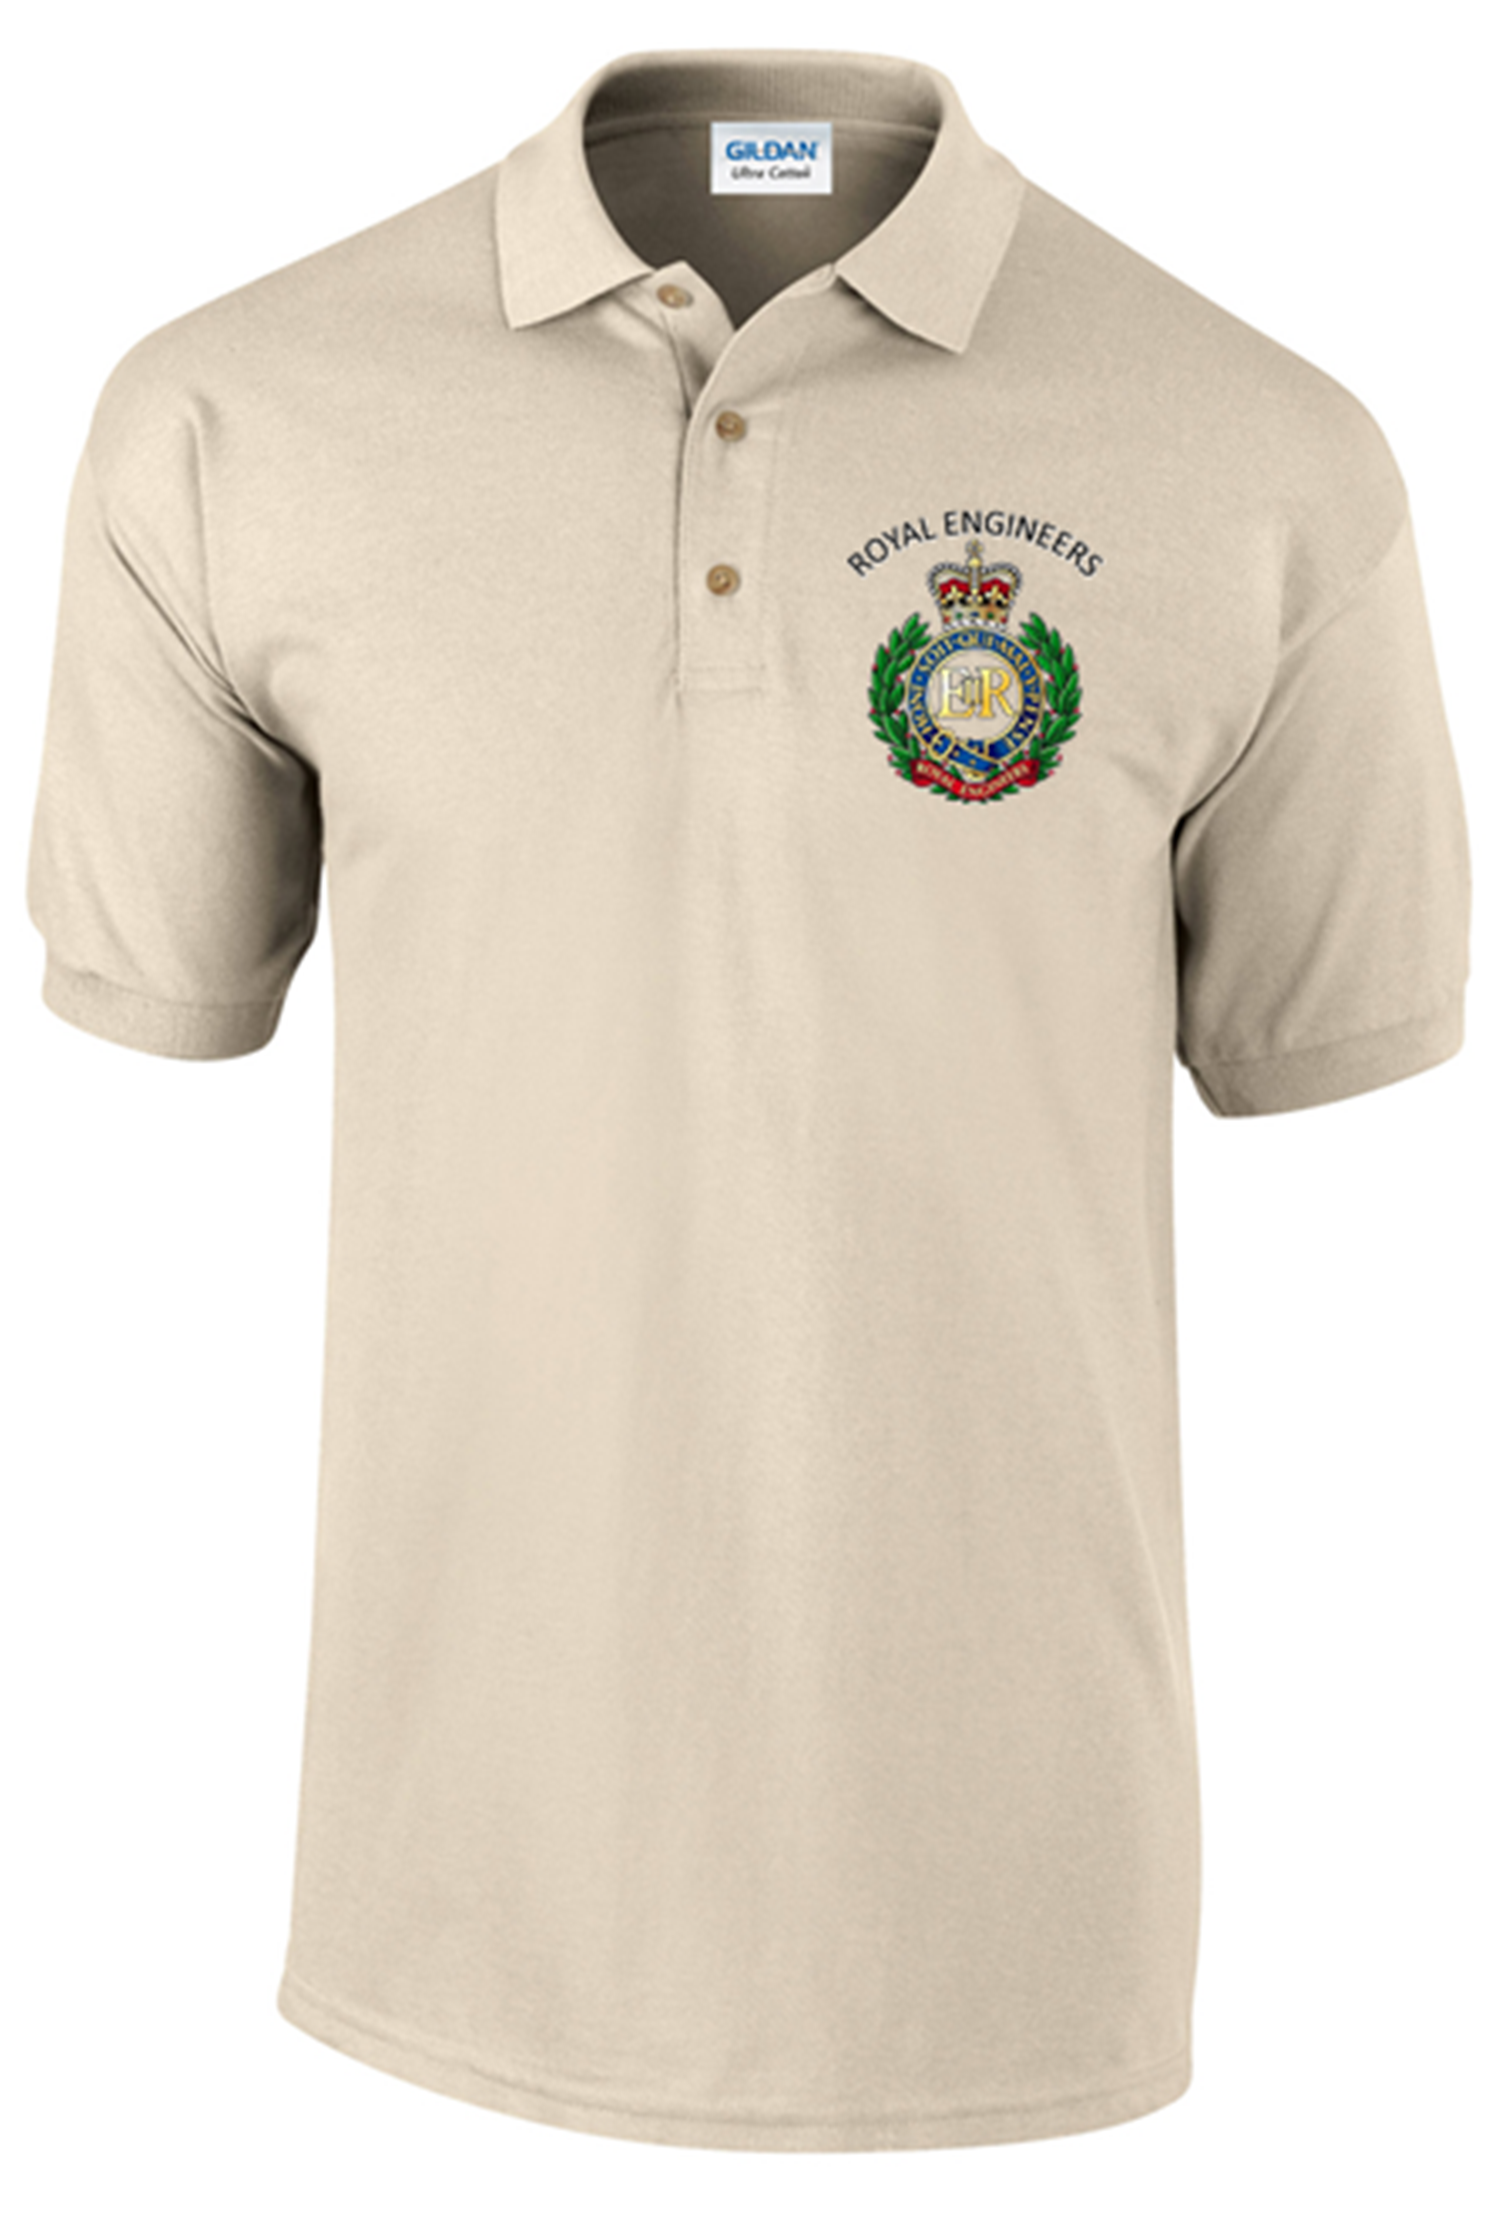 Royal Engineer Polo Shirt - Army 1157 kit S / Sand Army 1157 Kit Veterans Owned Business